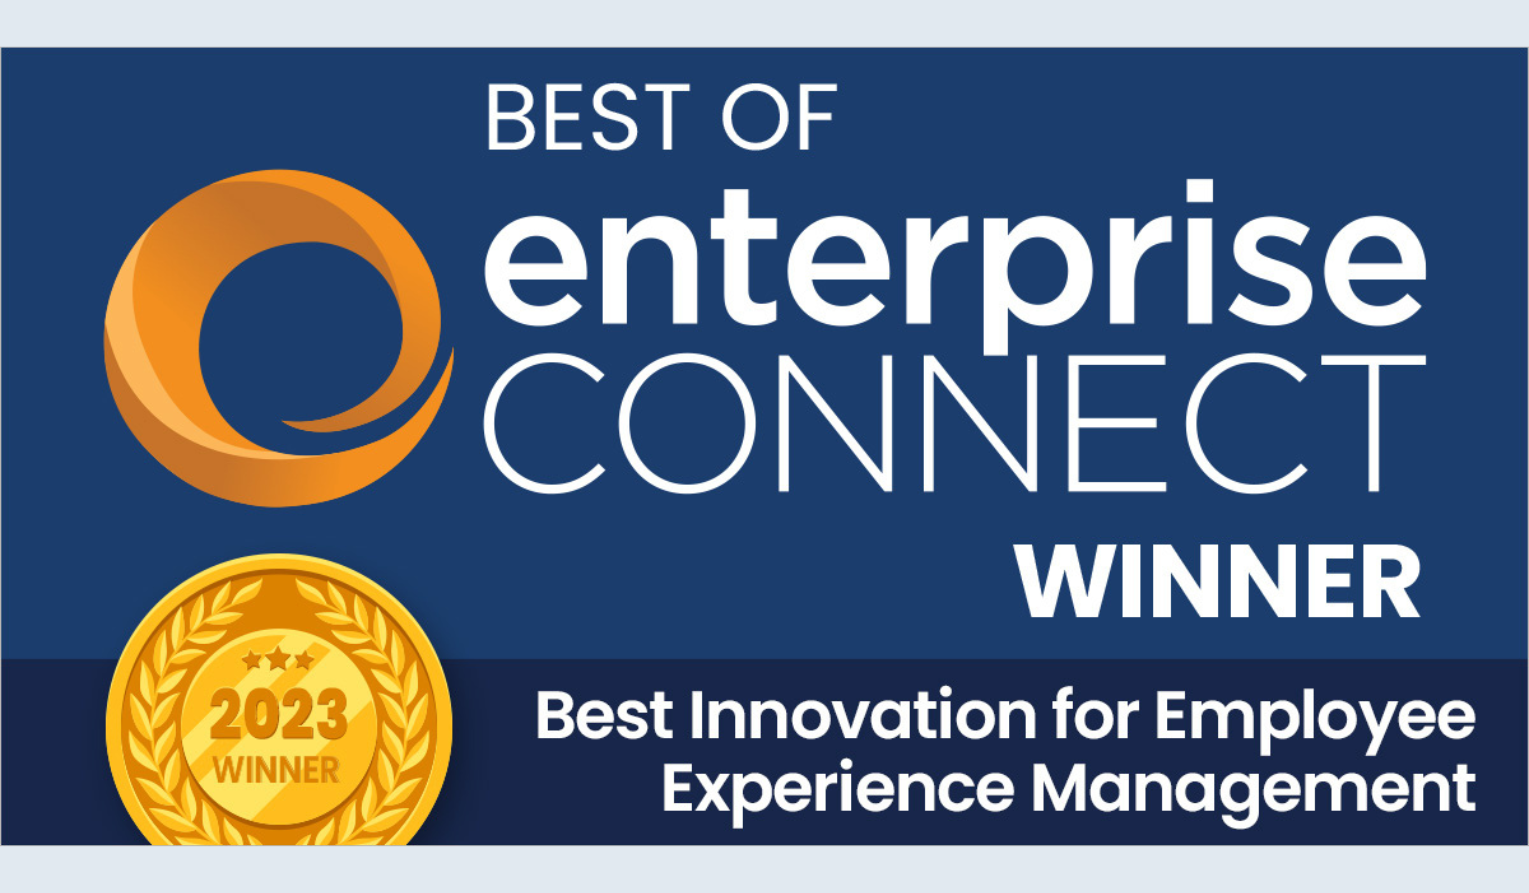 Vyopta Wins Best of Enterprise Connect 2023 for Best Innovation for Employee Experience Management